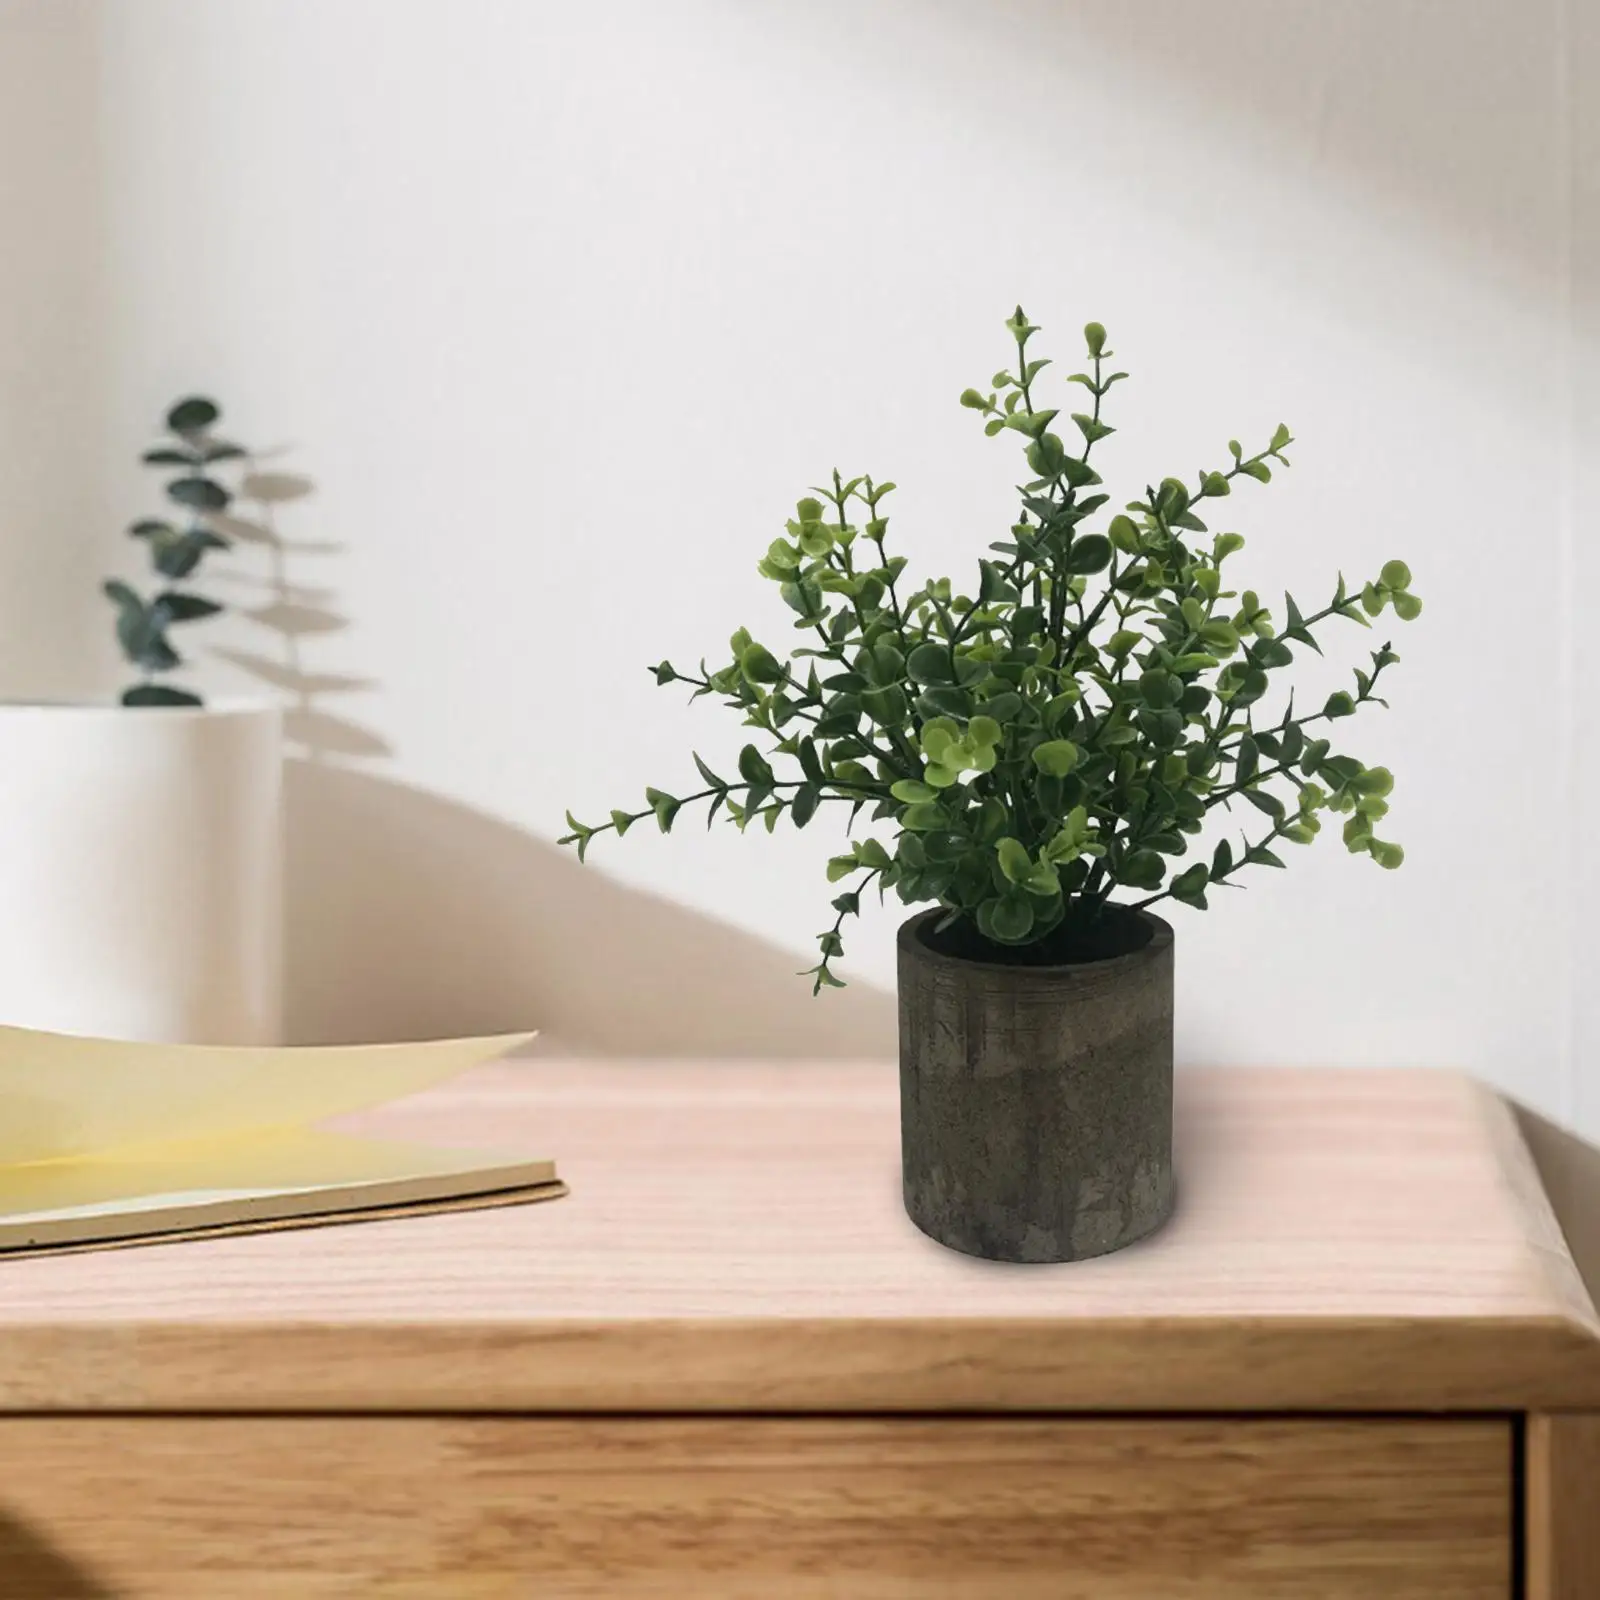 Mini Artificial Eucalyptus Plants with Pot for Office Desk, Fake Plant with Plastic Pots for Home, Shower Rooms Decoration